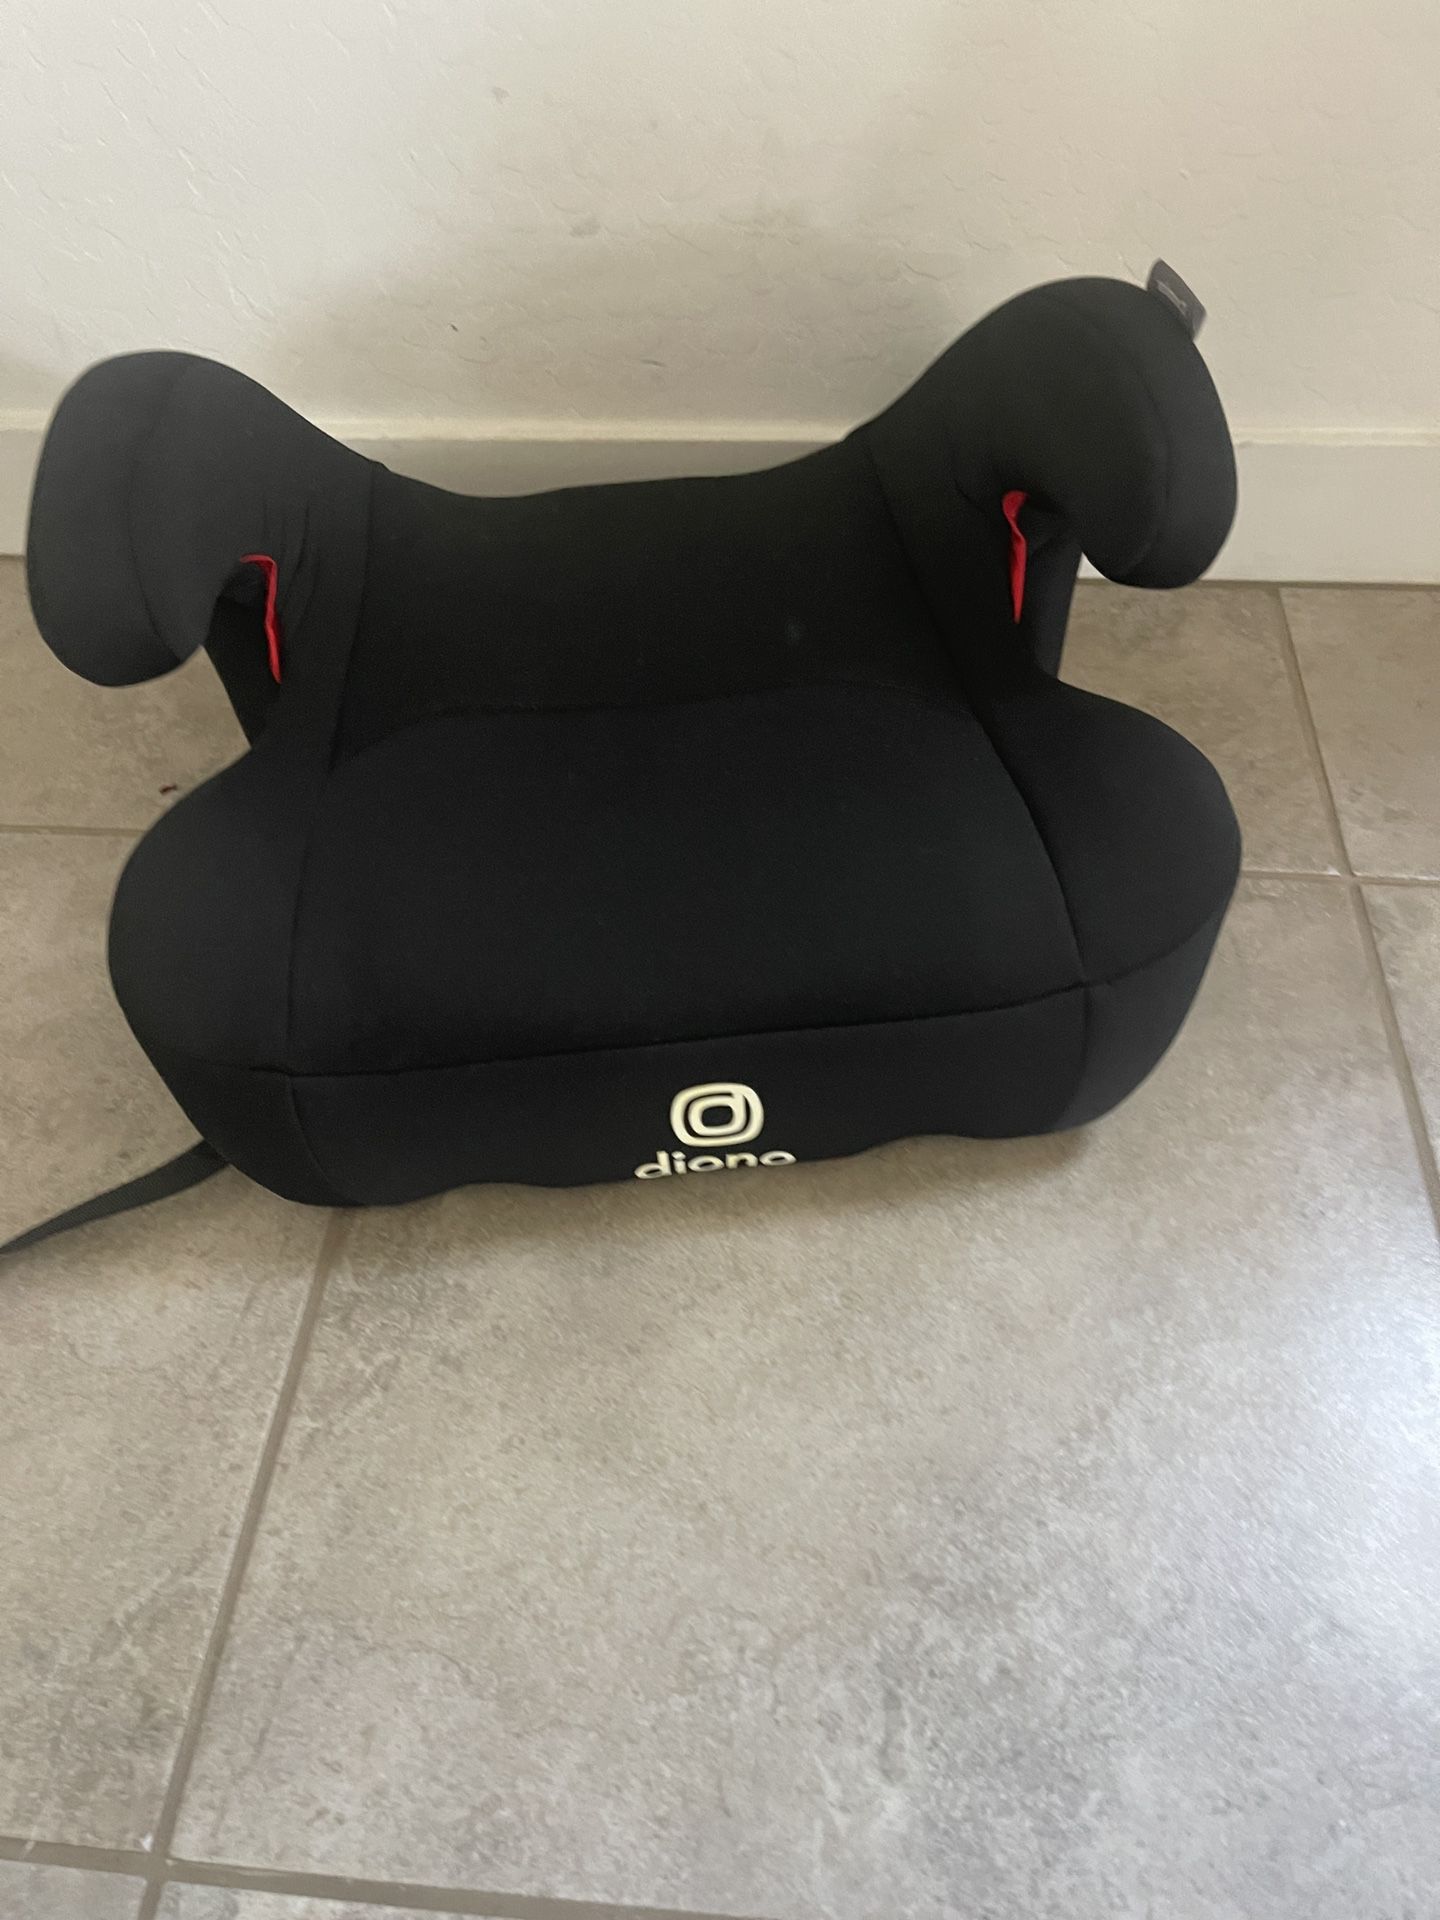 Diono Booster Car Seat - New 